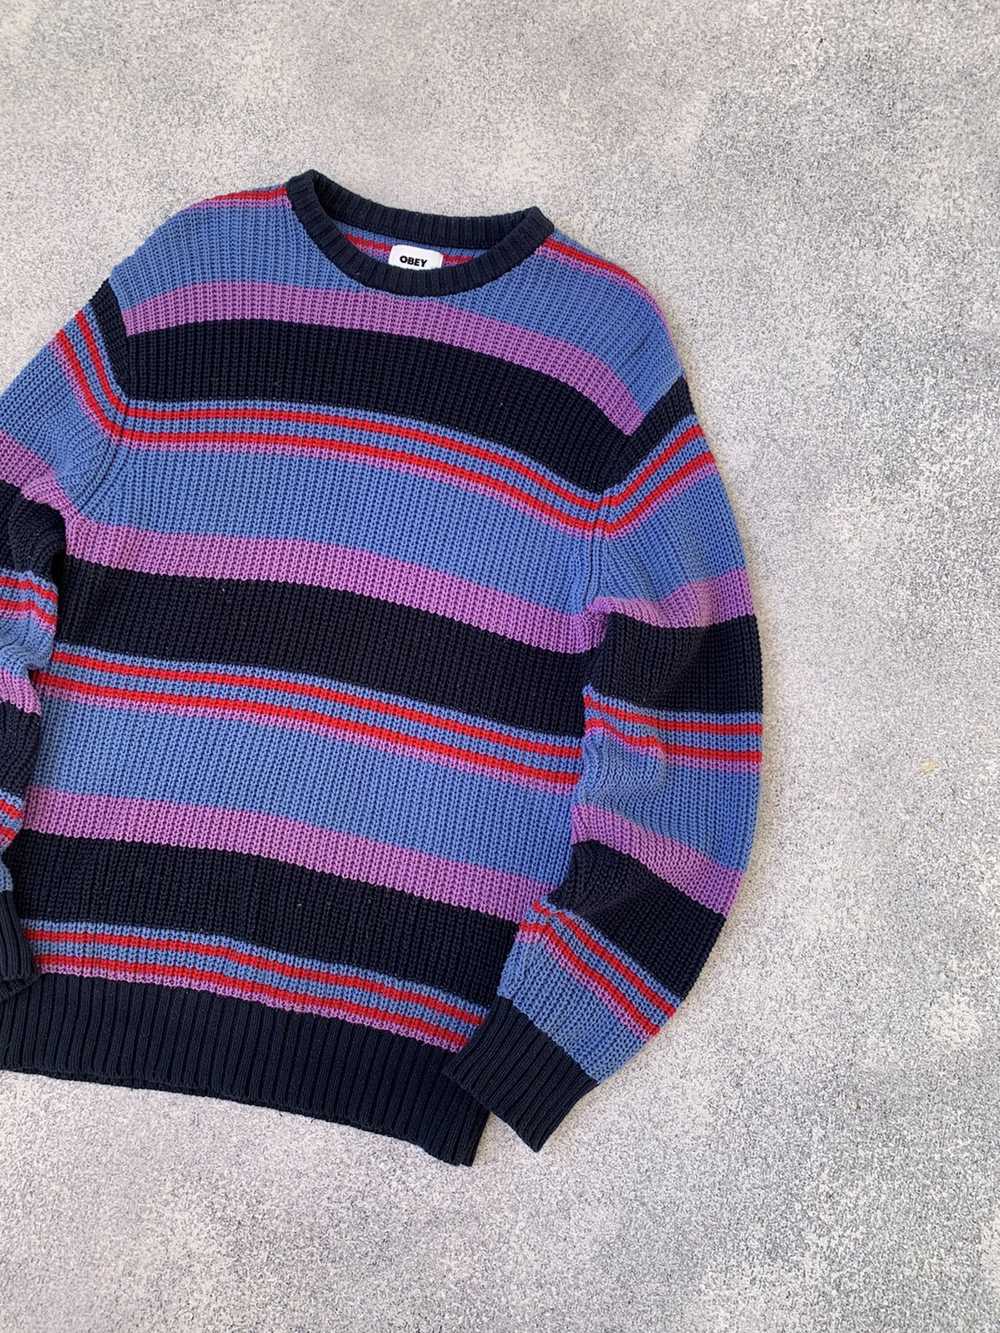 Coloured Cable Knit Sweater × Obey × Vintage Vint… - image 2